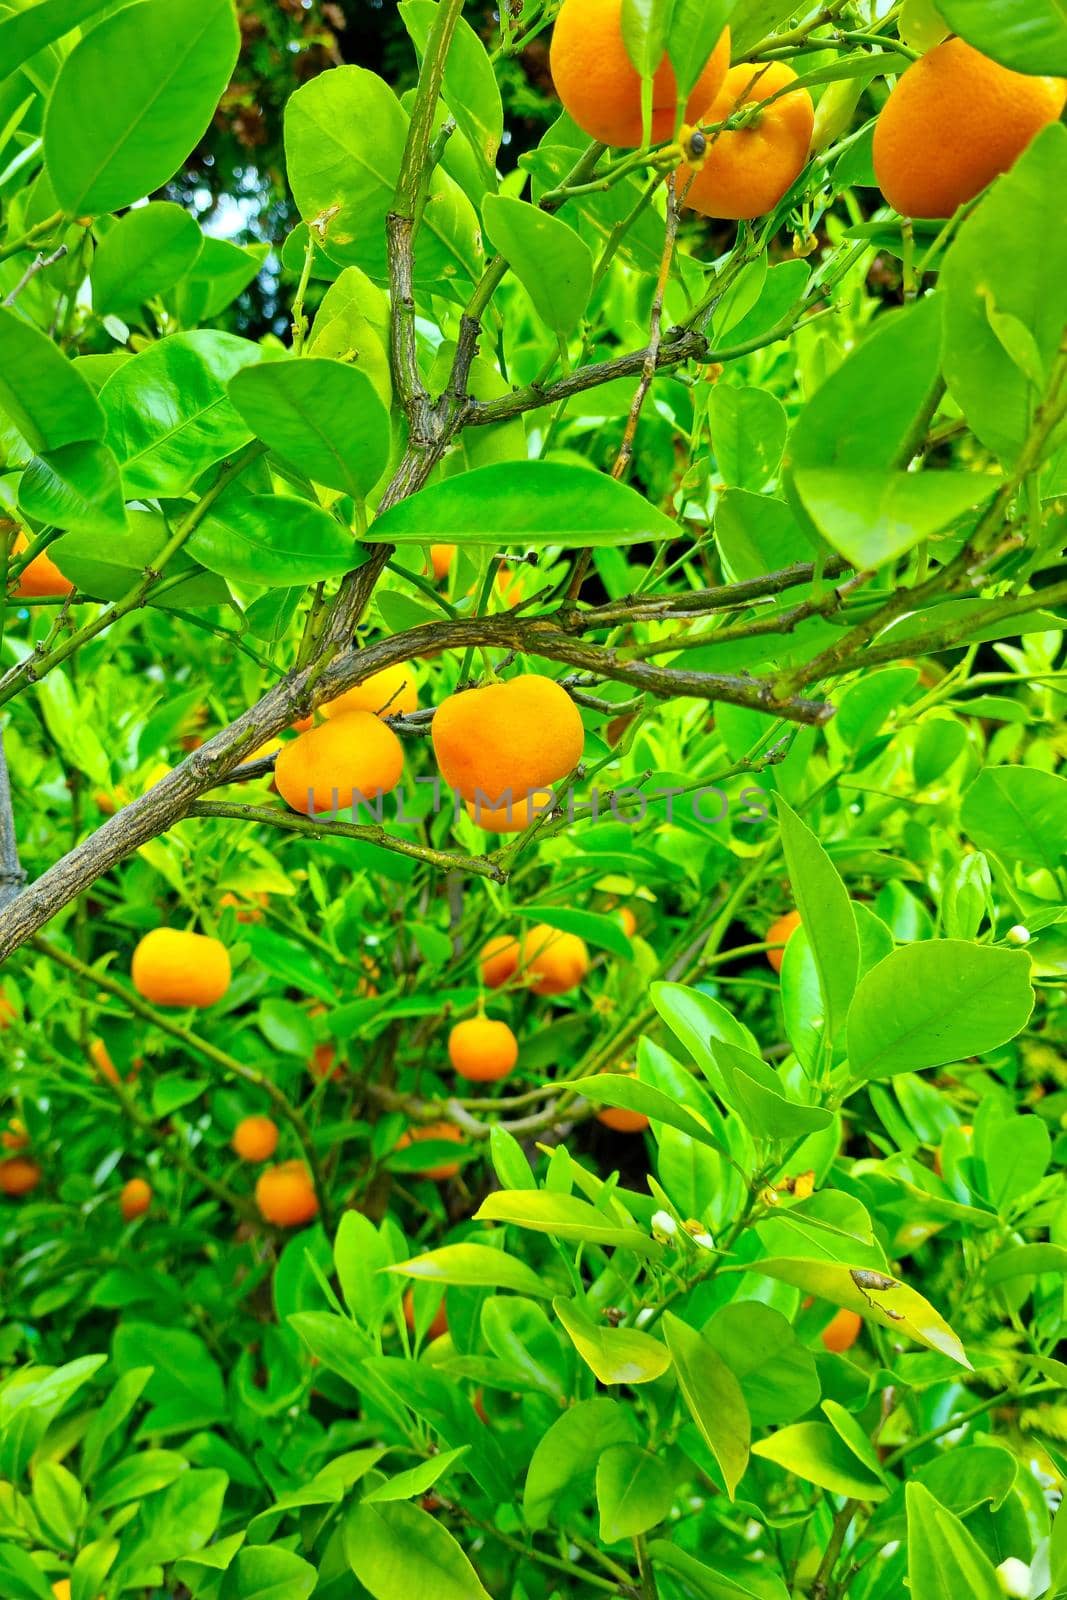 Ripe tangerines on branches in the garden. by kip02kas